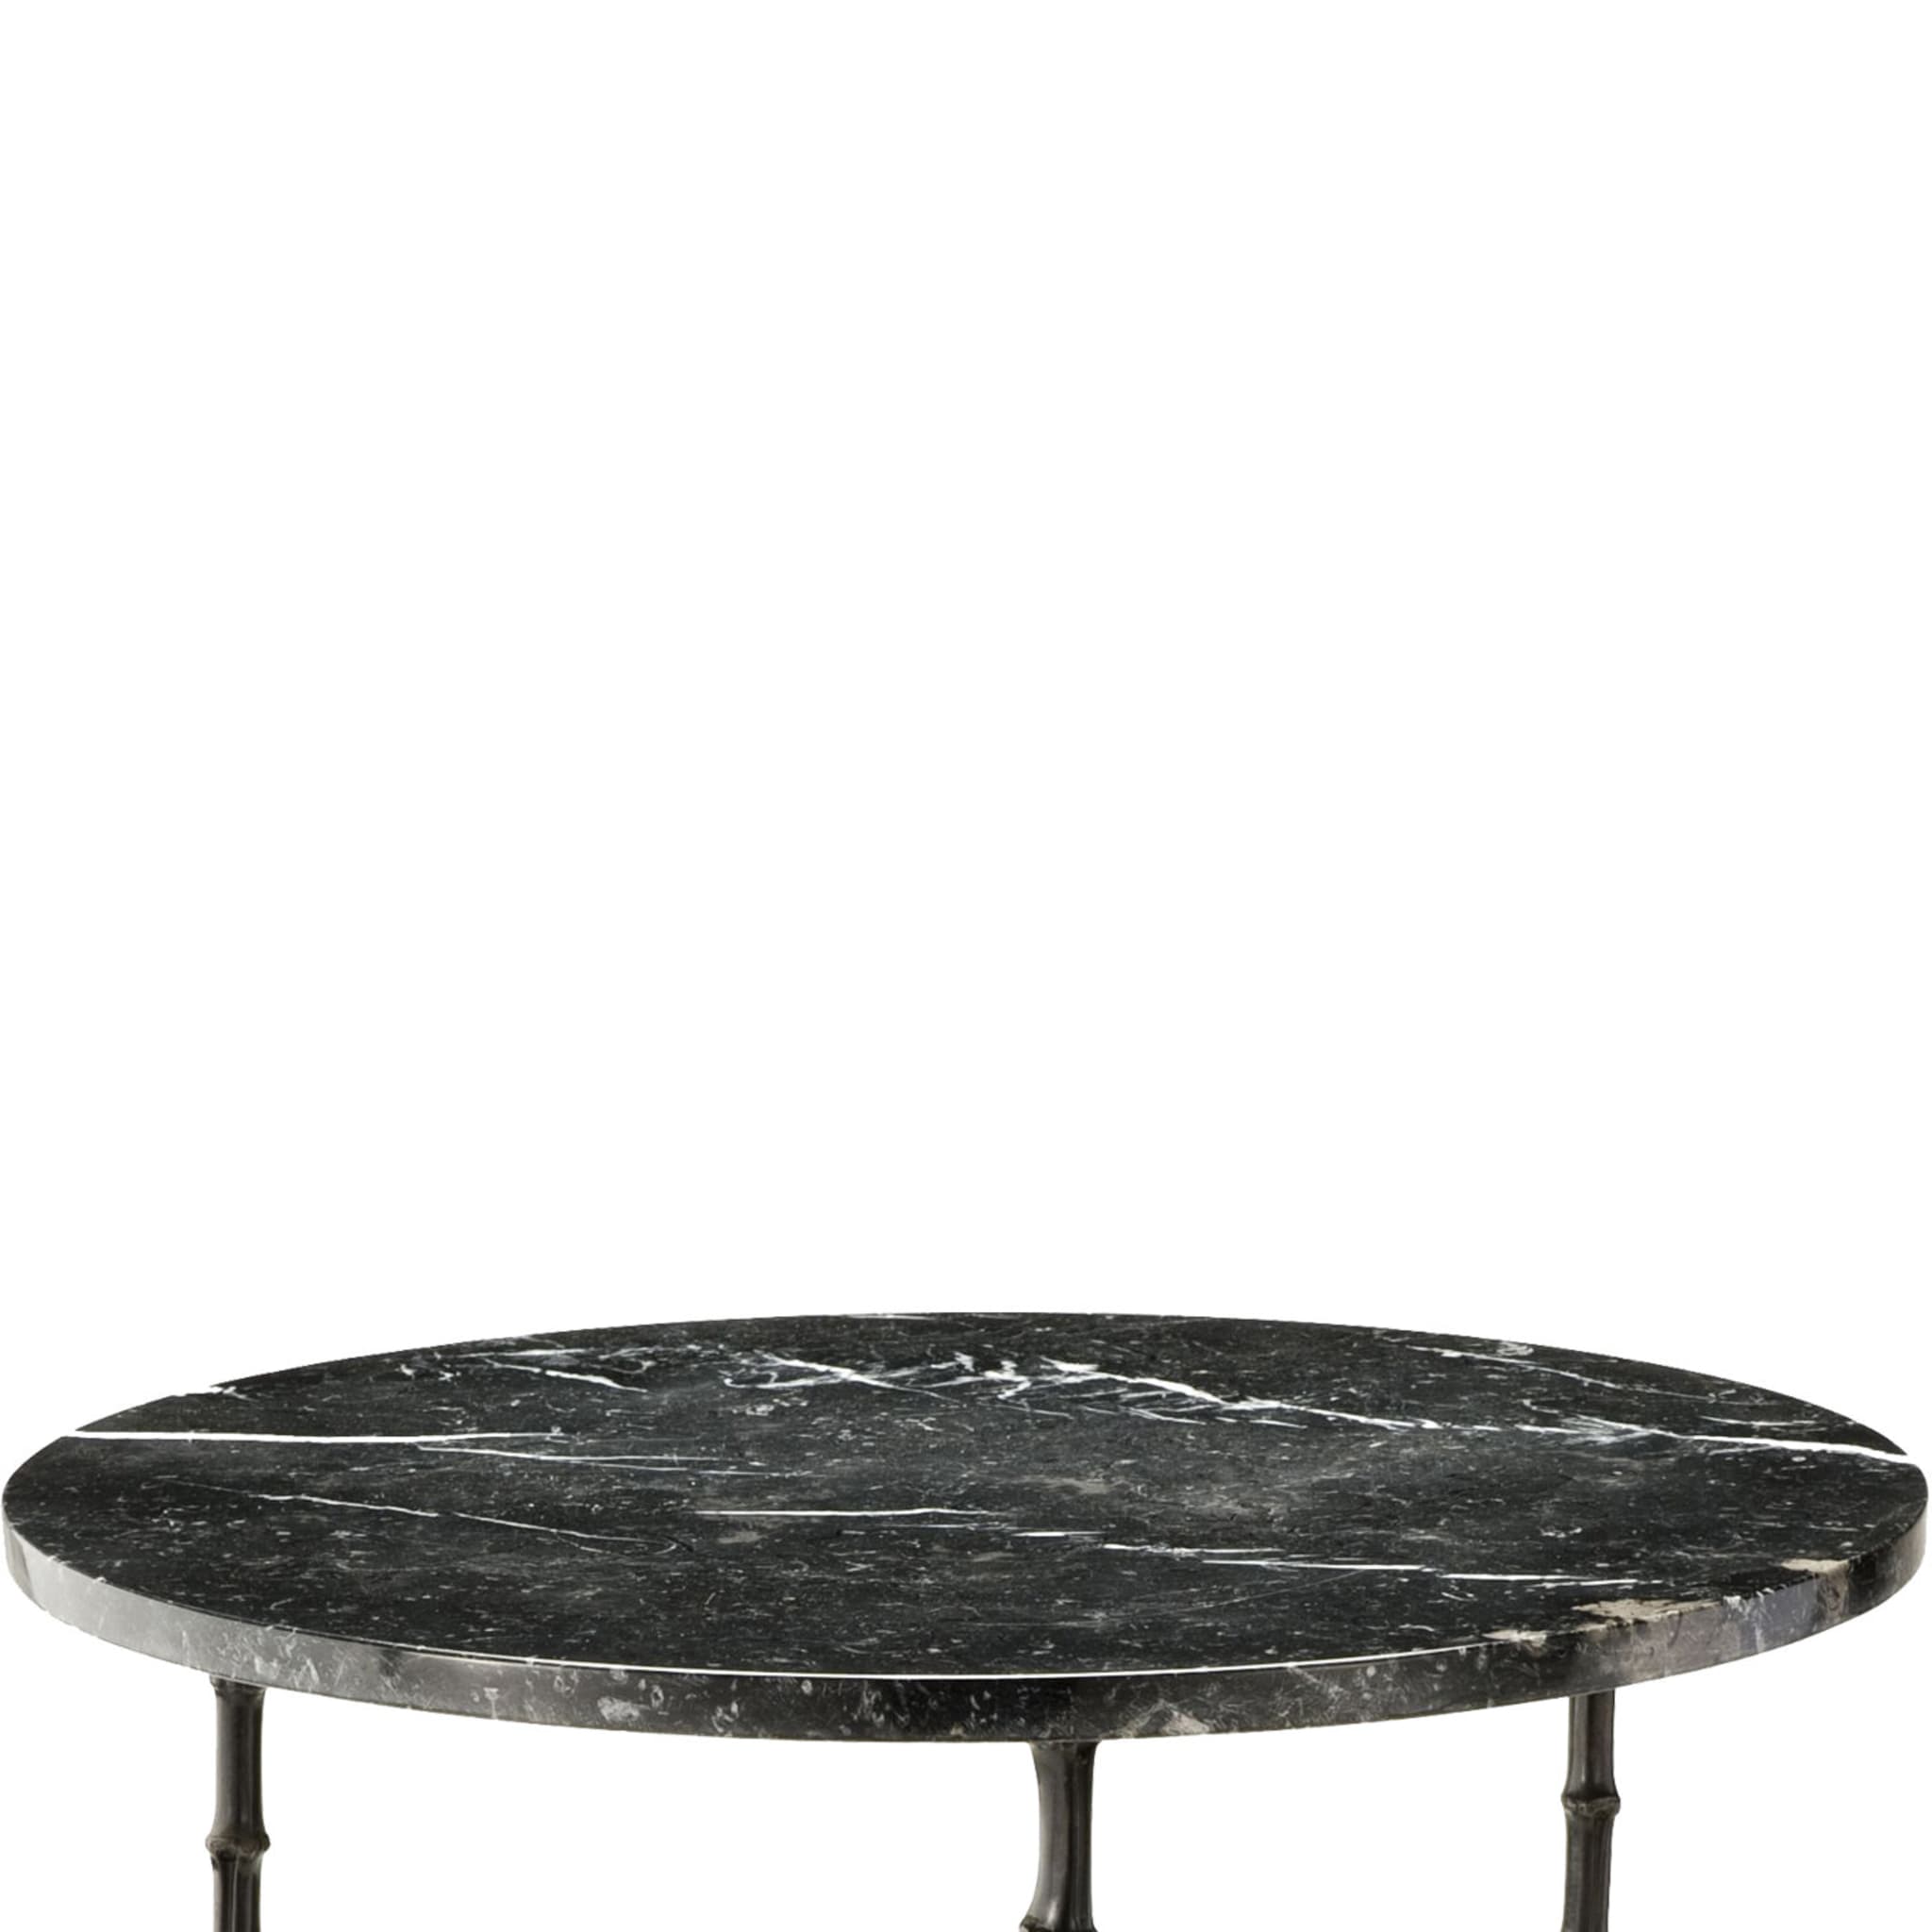 Bamboo N°7 Marble Table - Alternative view 1